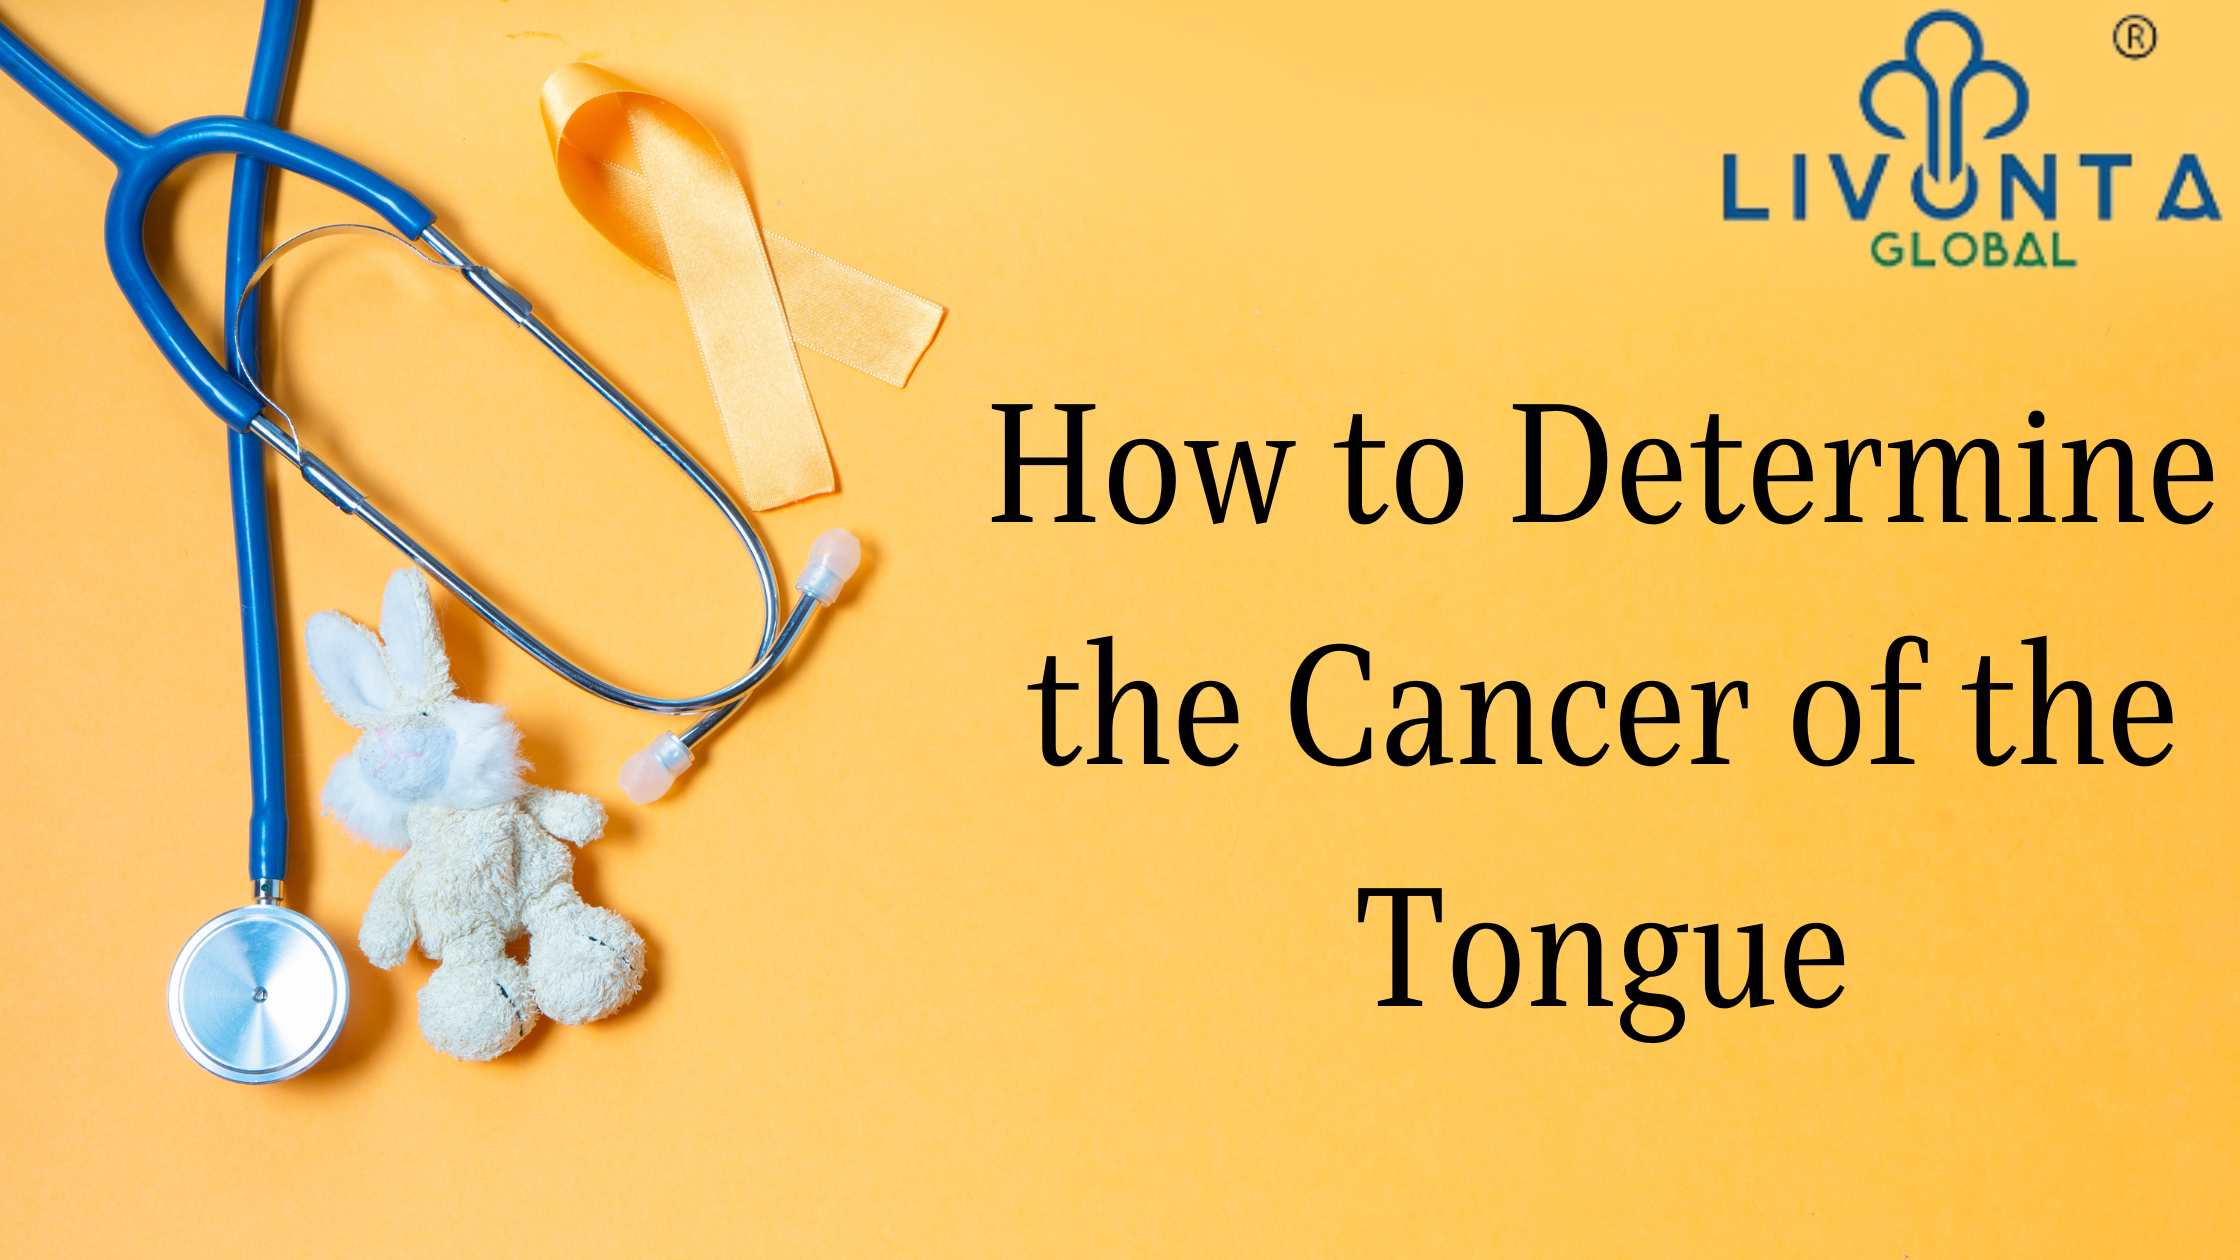 How to Determine the Cancer of the Tongue